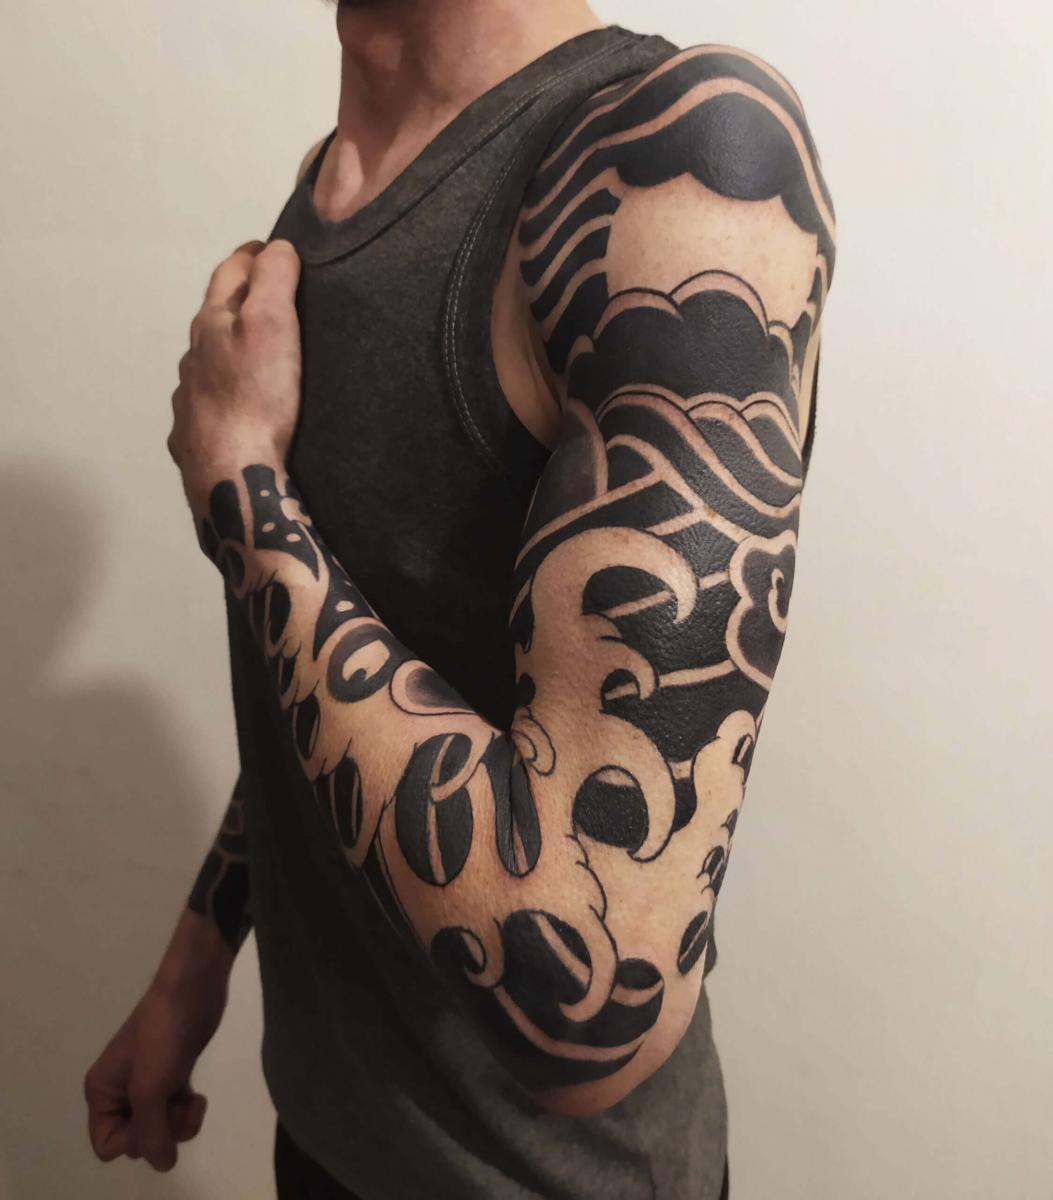 cool blackout tattoo ideas by Lupo Horiokami 2a  KickAss Things